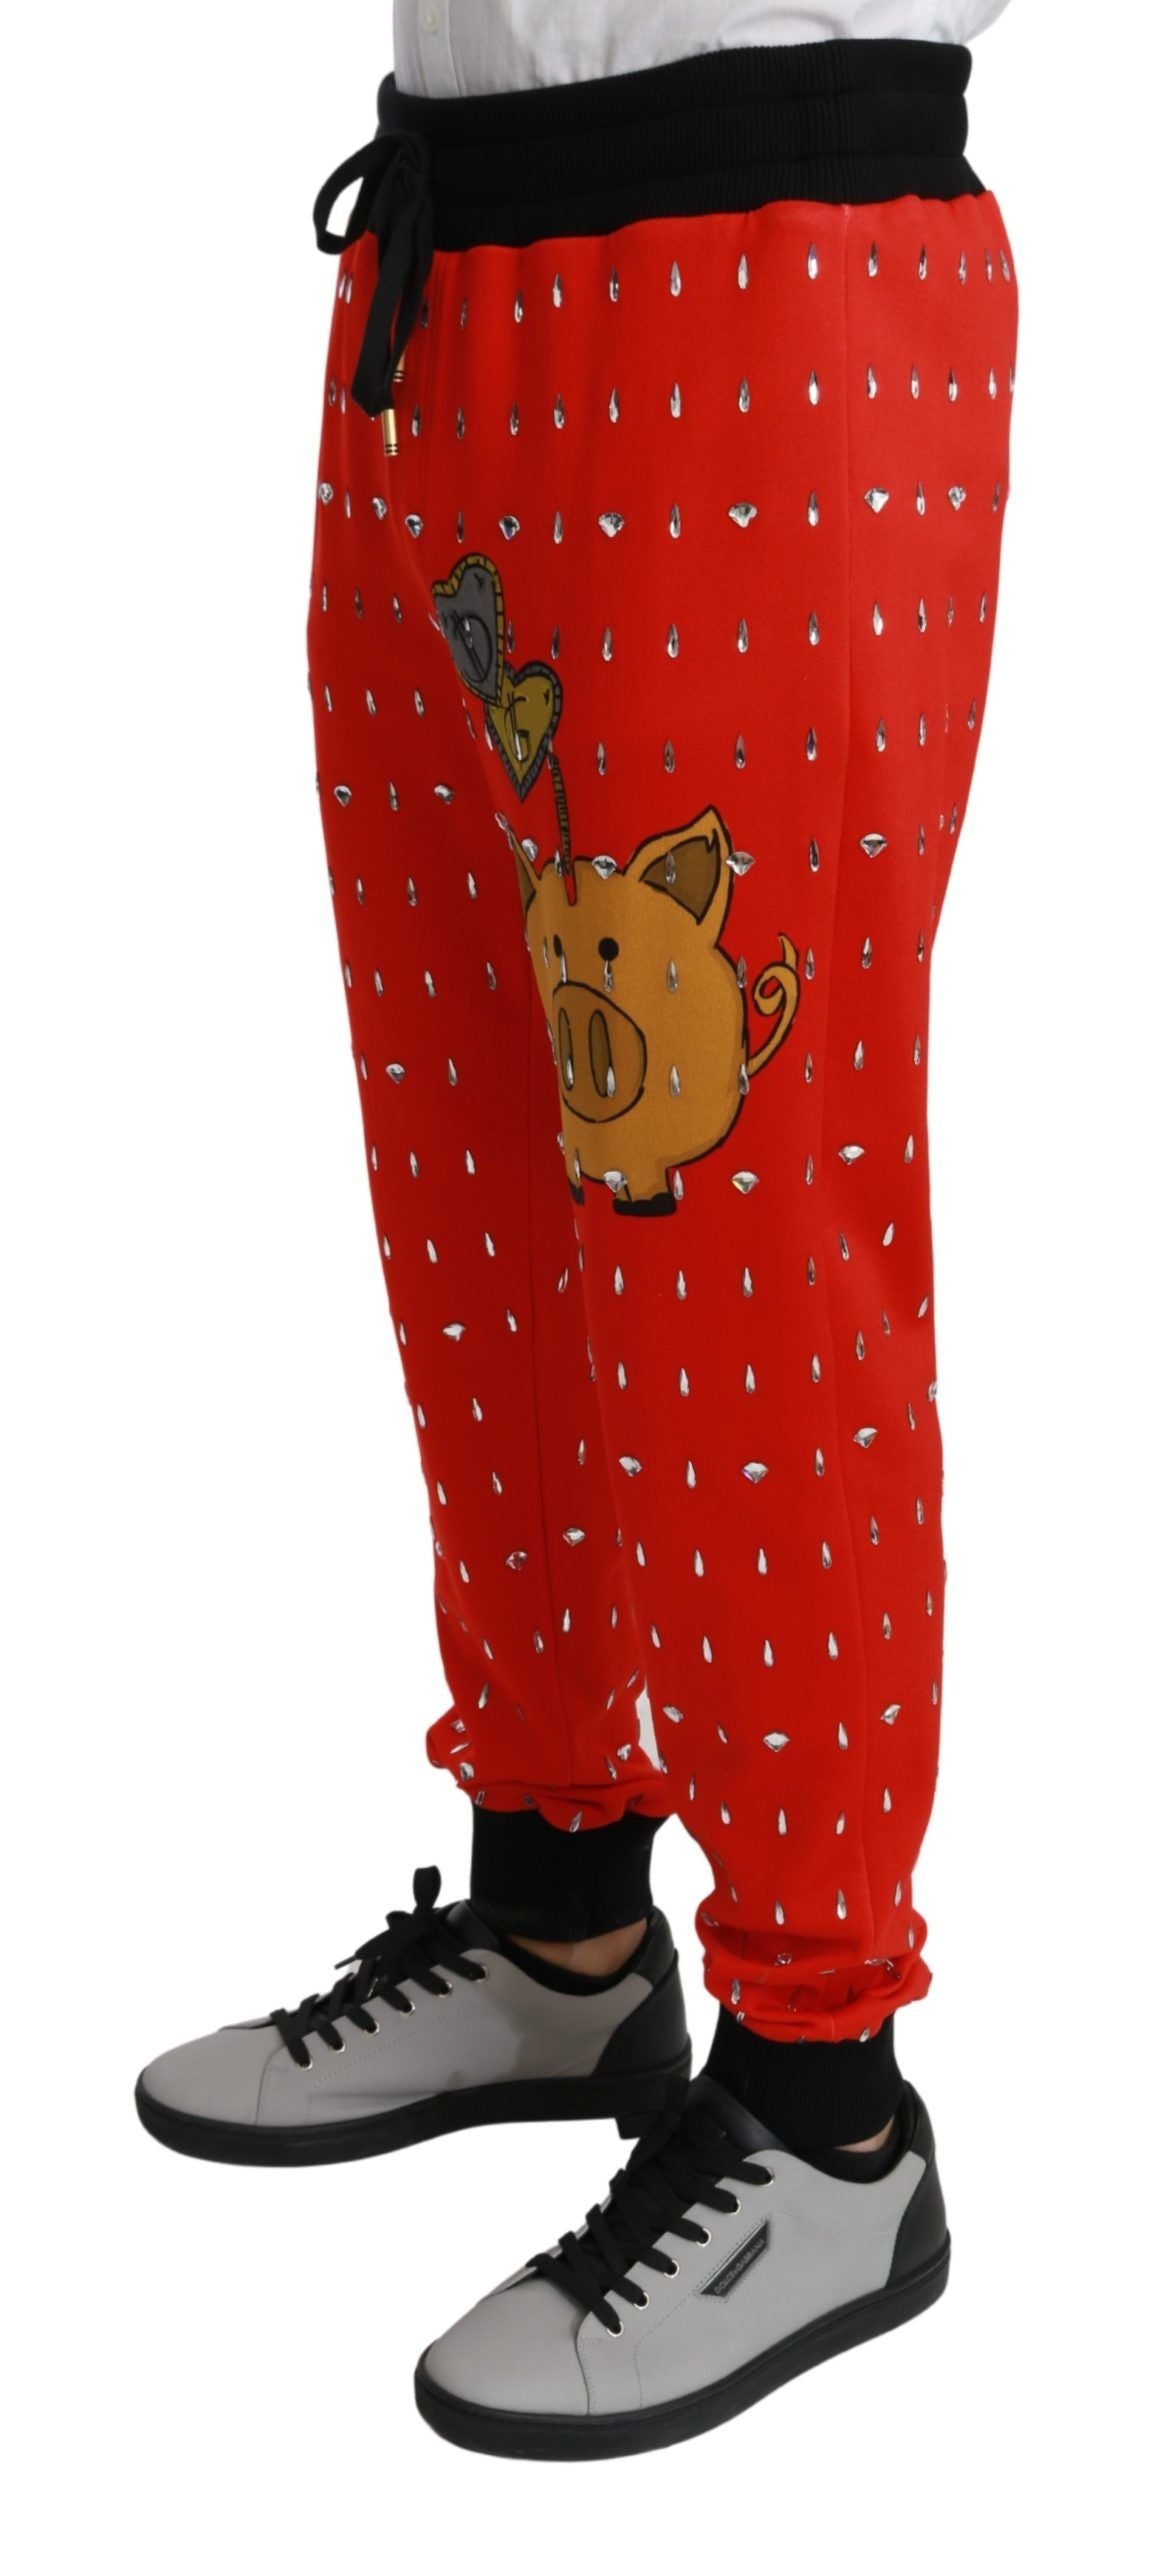 Dolce & Gabbana Red Piggy Bank Cotton Crystal Trousers Pants